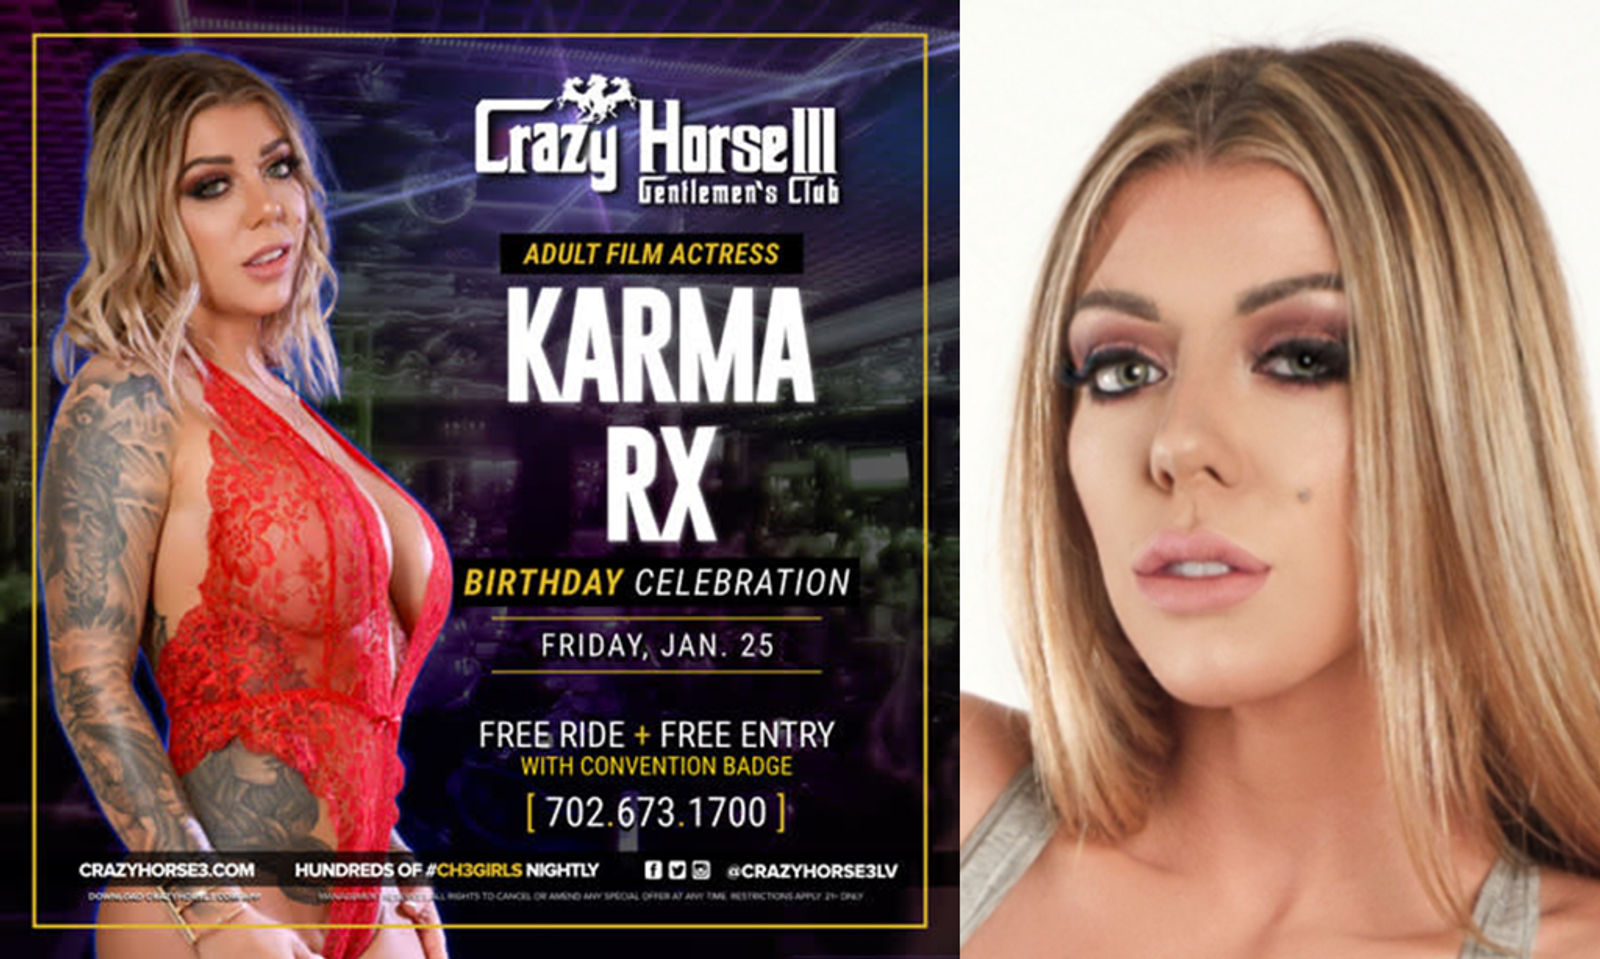 Karma Rx to Host Birthday Party at Crazy Horse III in Las Vegas